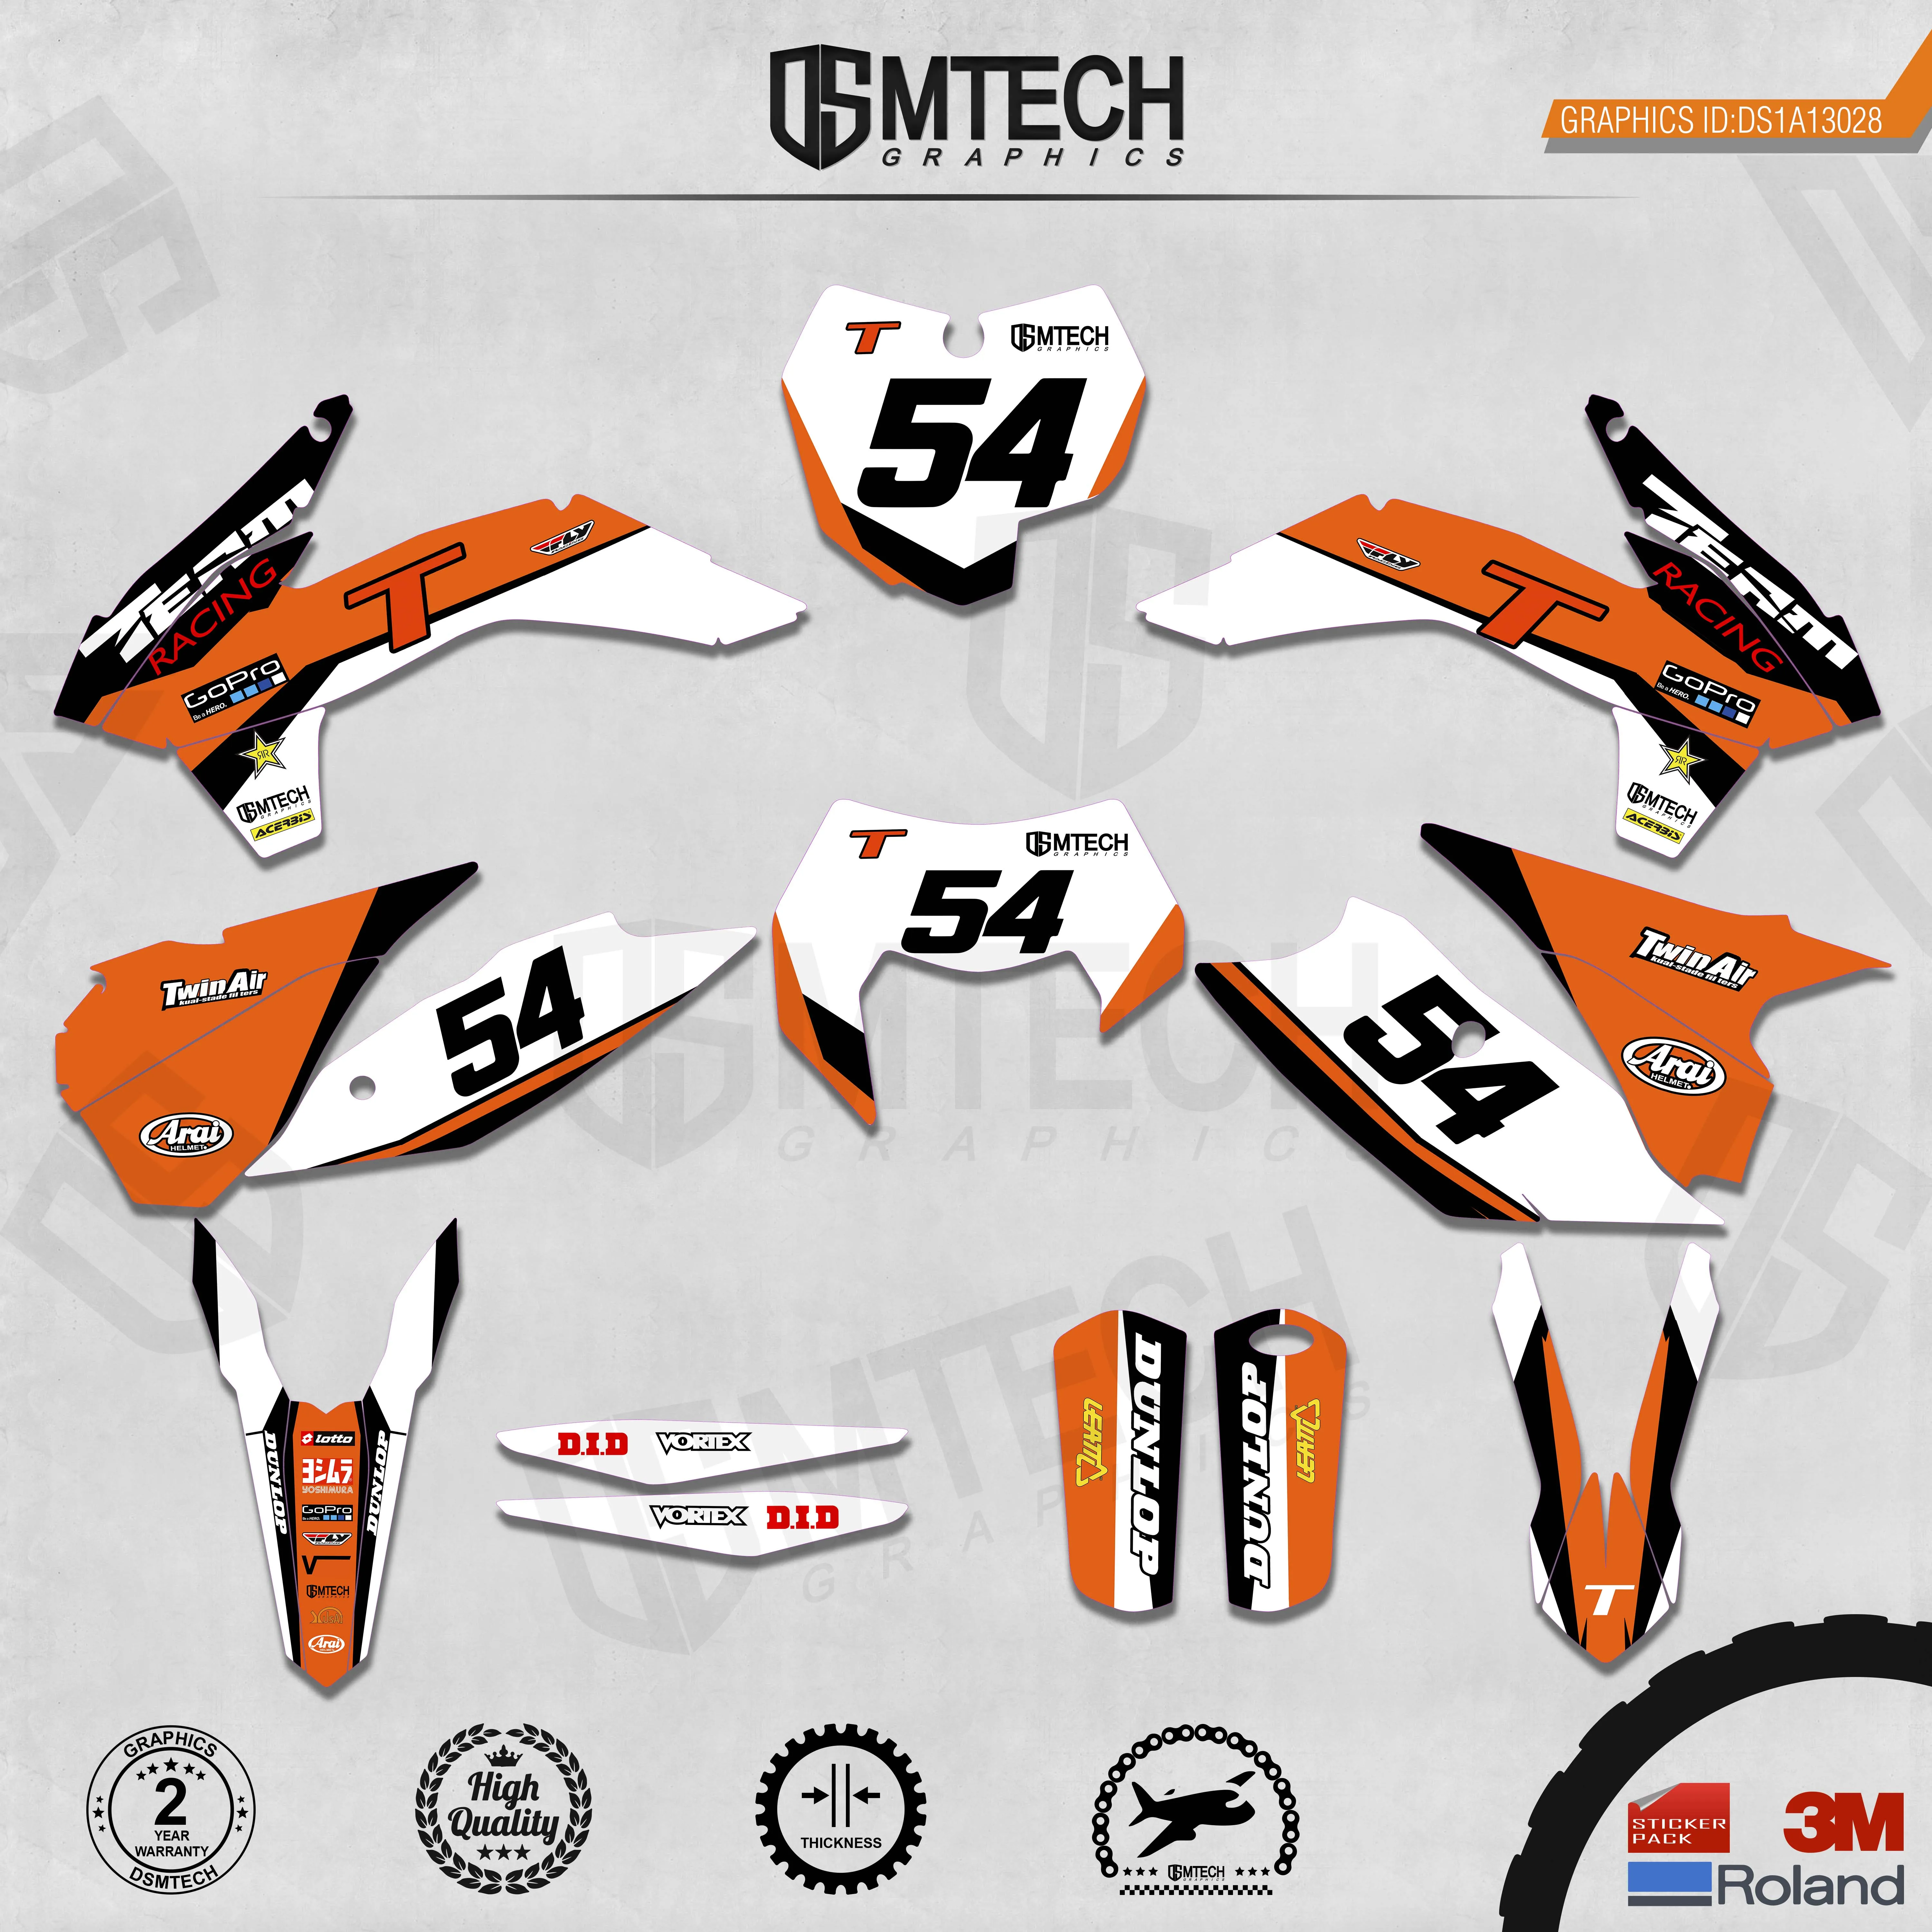 DSMTECH Customized Team Graphics Backgrounds Decals 3M Custom Stickers For 2013-2014 SXF 2015 SXF 2014-2015 EXC 2016 EXC  028